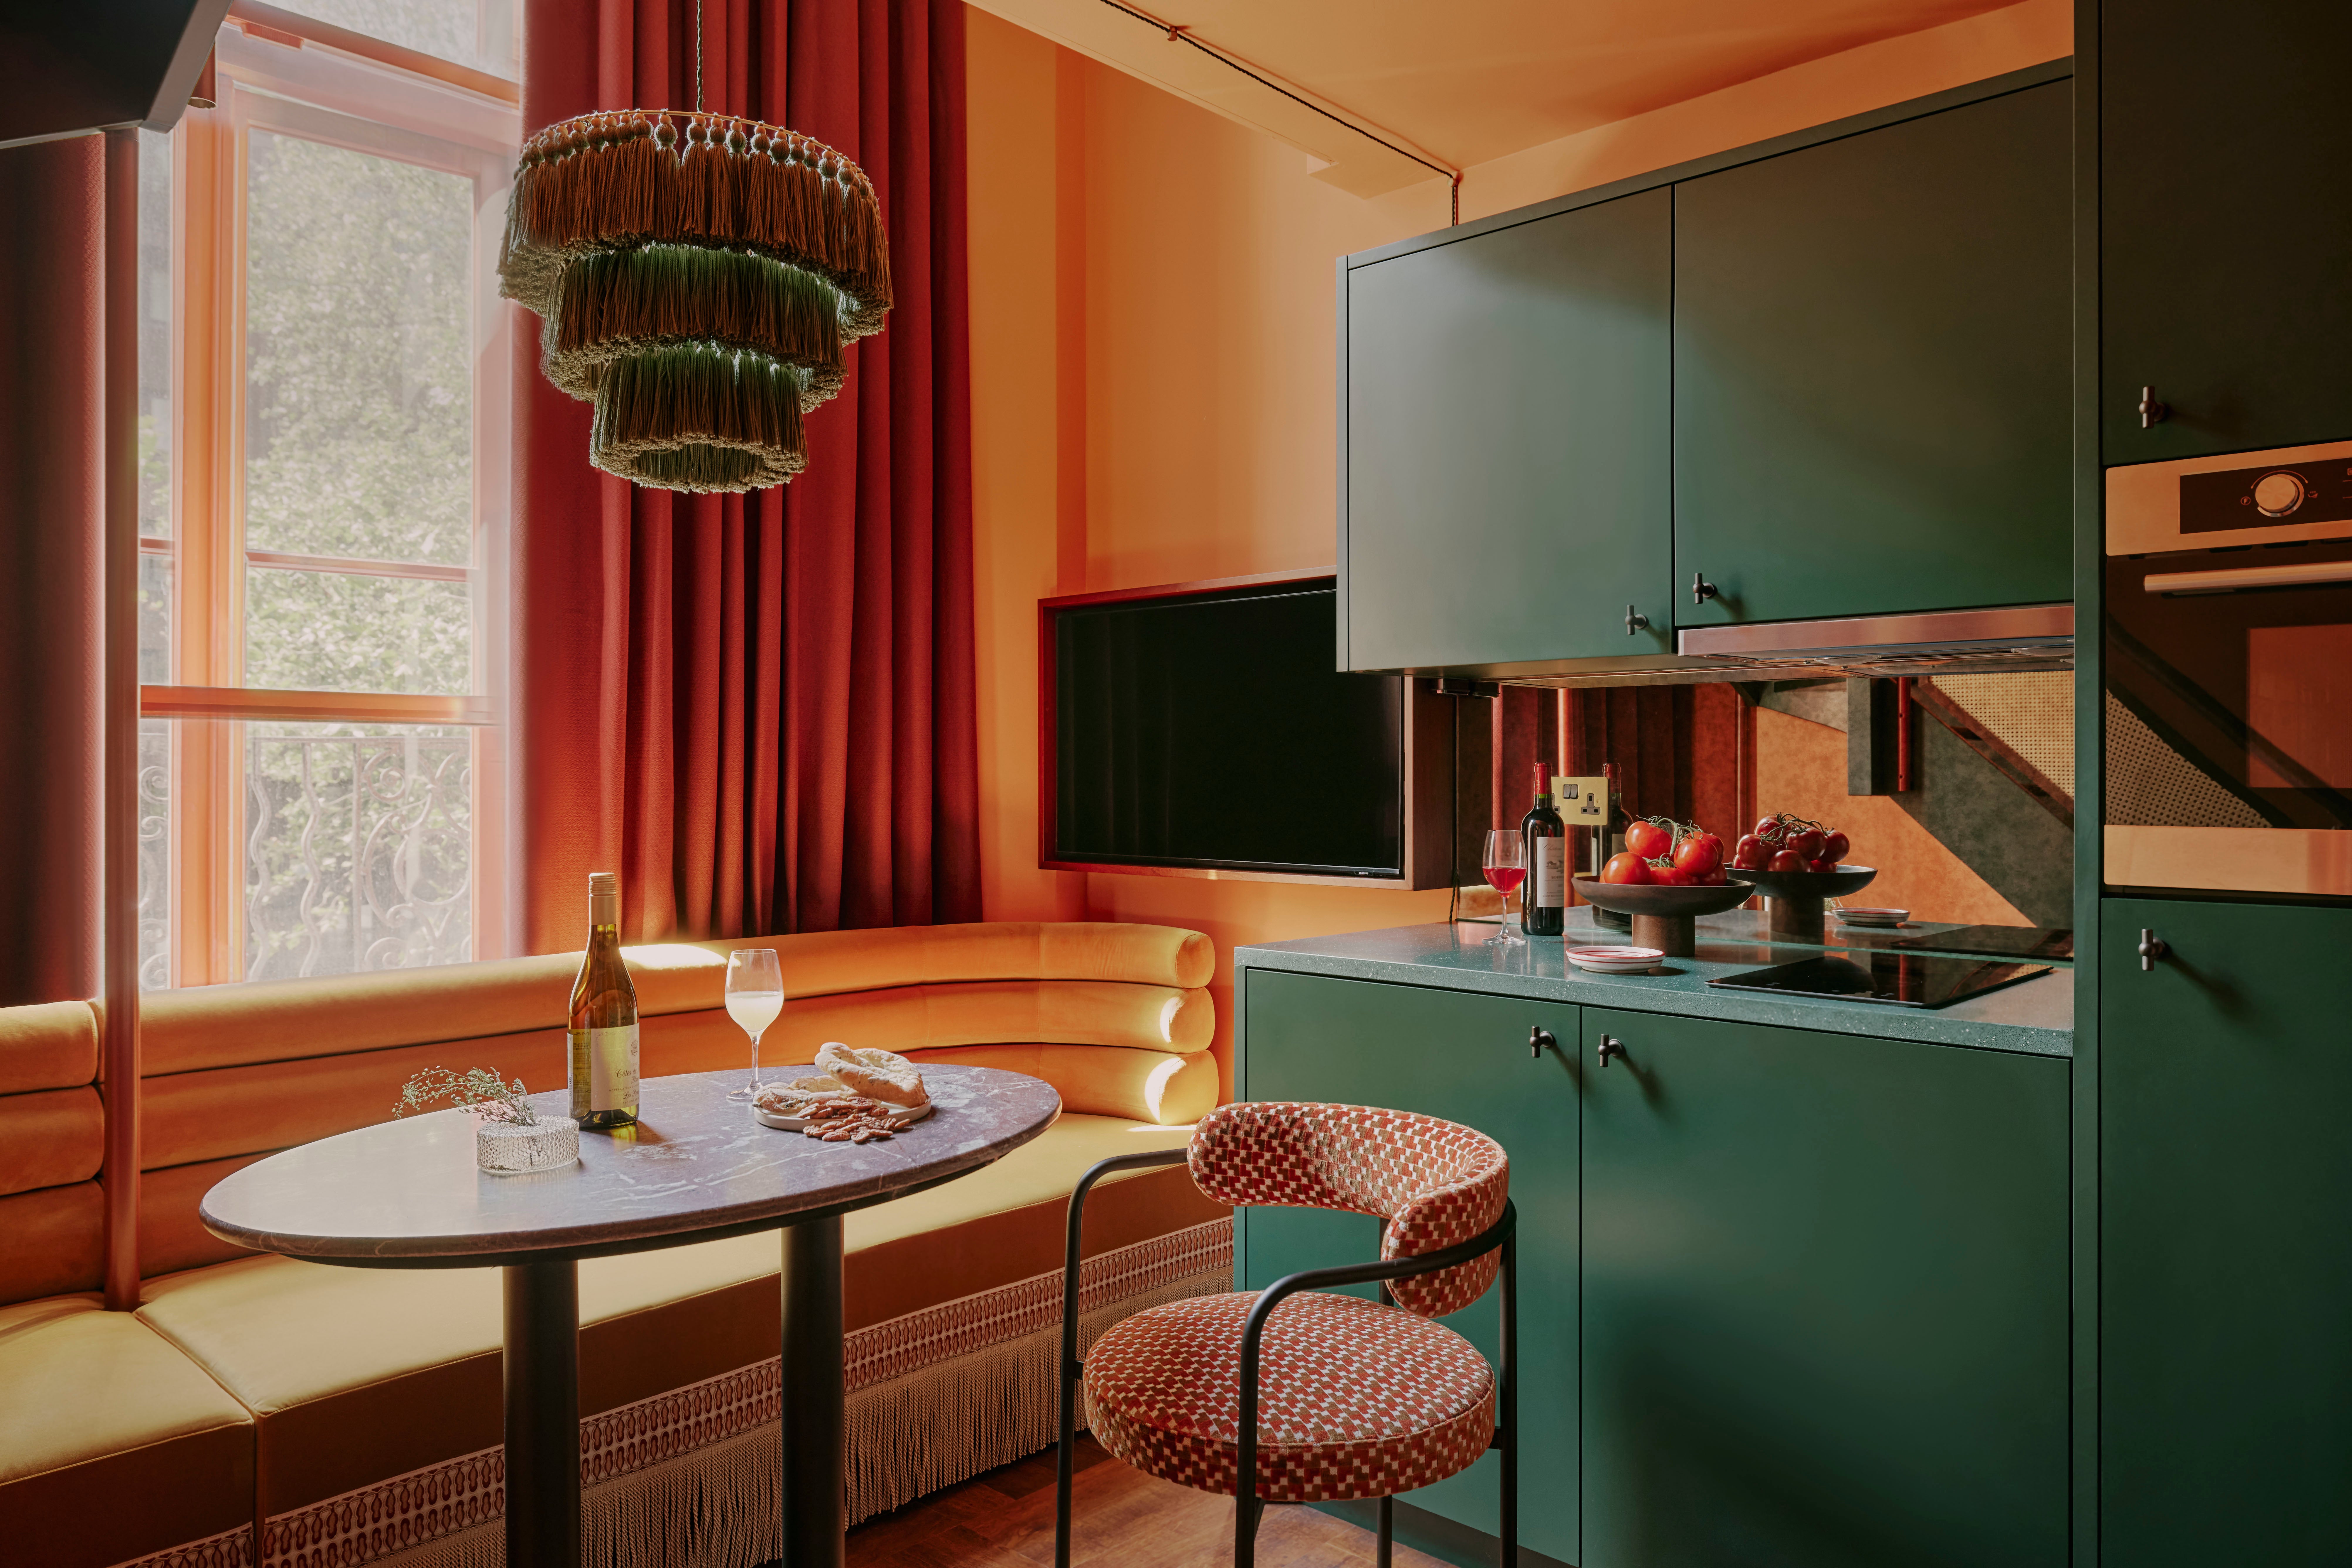 Licks of coral and teal paintwork accent home-from-home-feeling self-catering kitchens